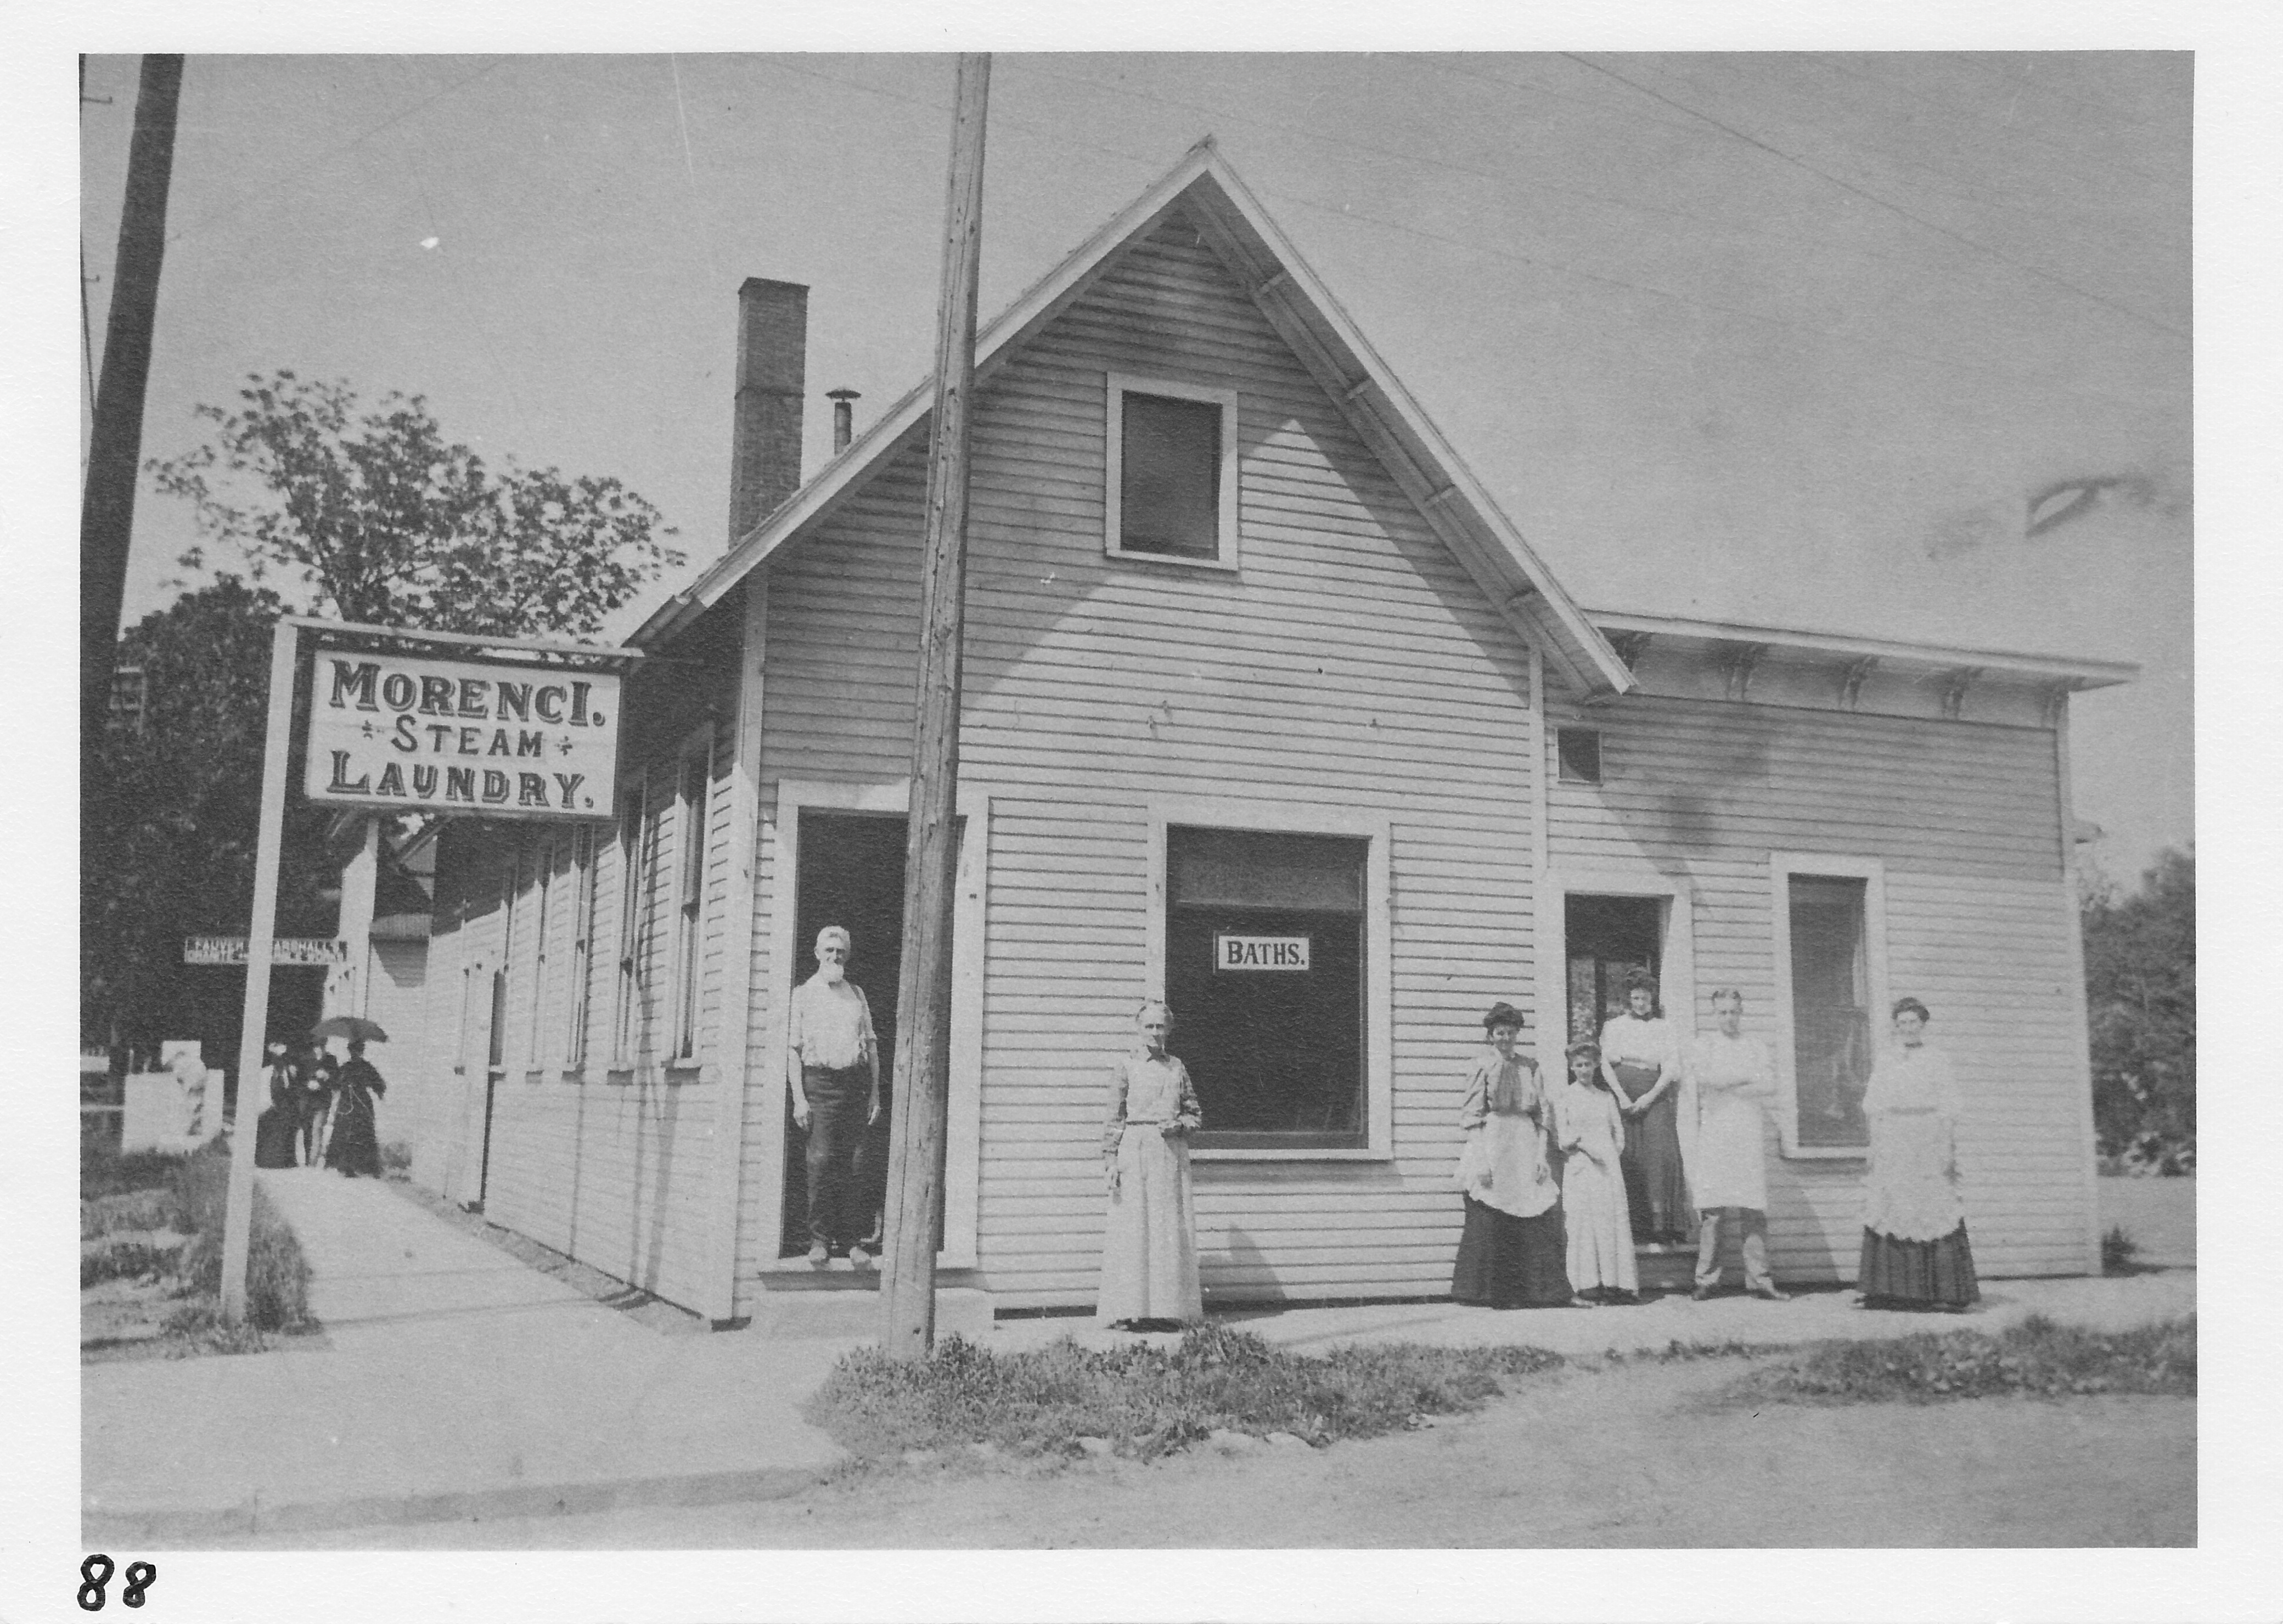 Morenci Steam Laundry, northeast corner of North and West Locust streets.  Mr. A. A. Abbott in doorway.  Burned Jan. 21, 1919.